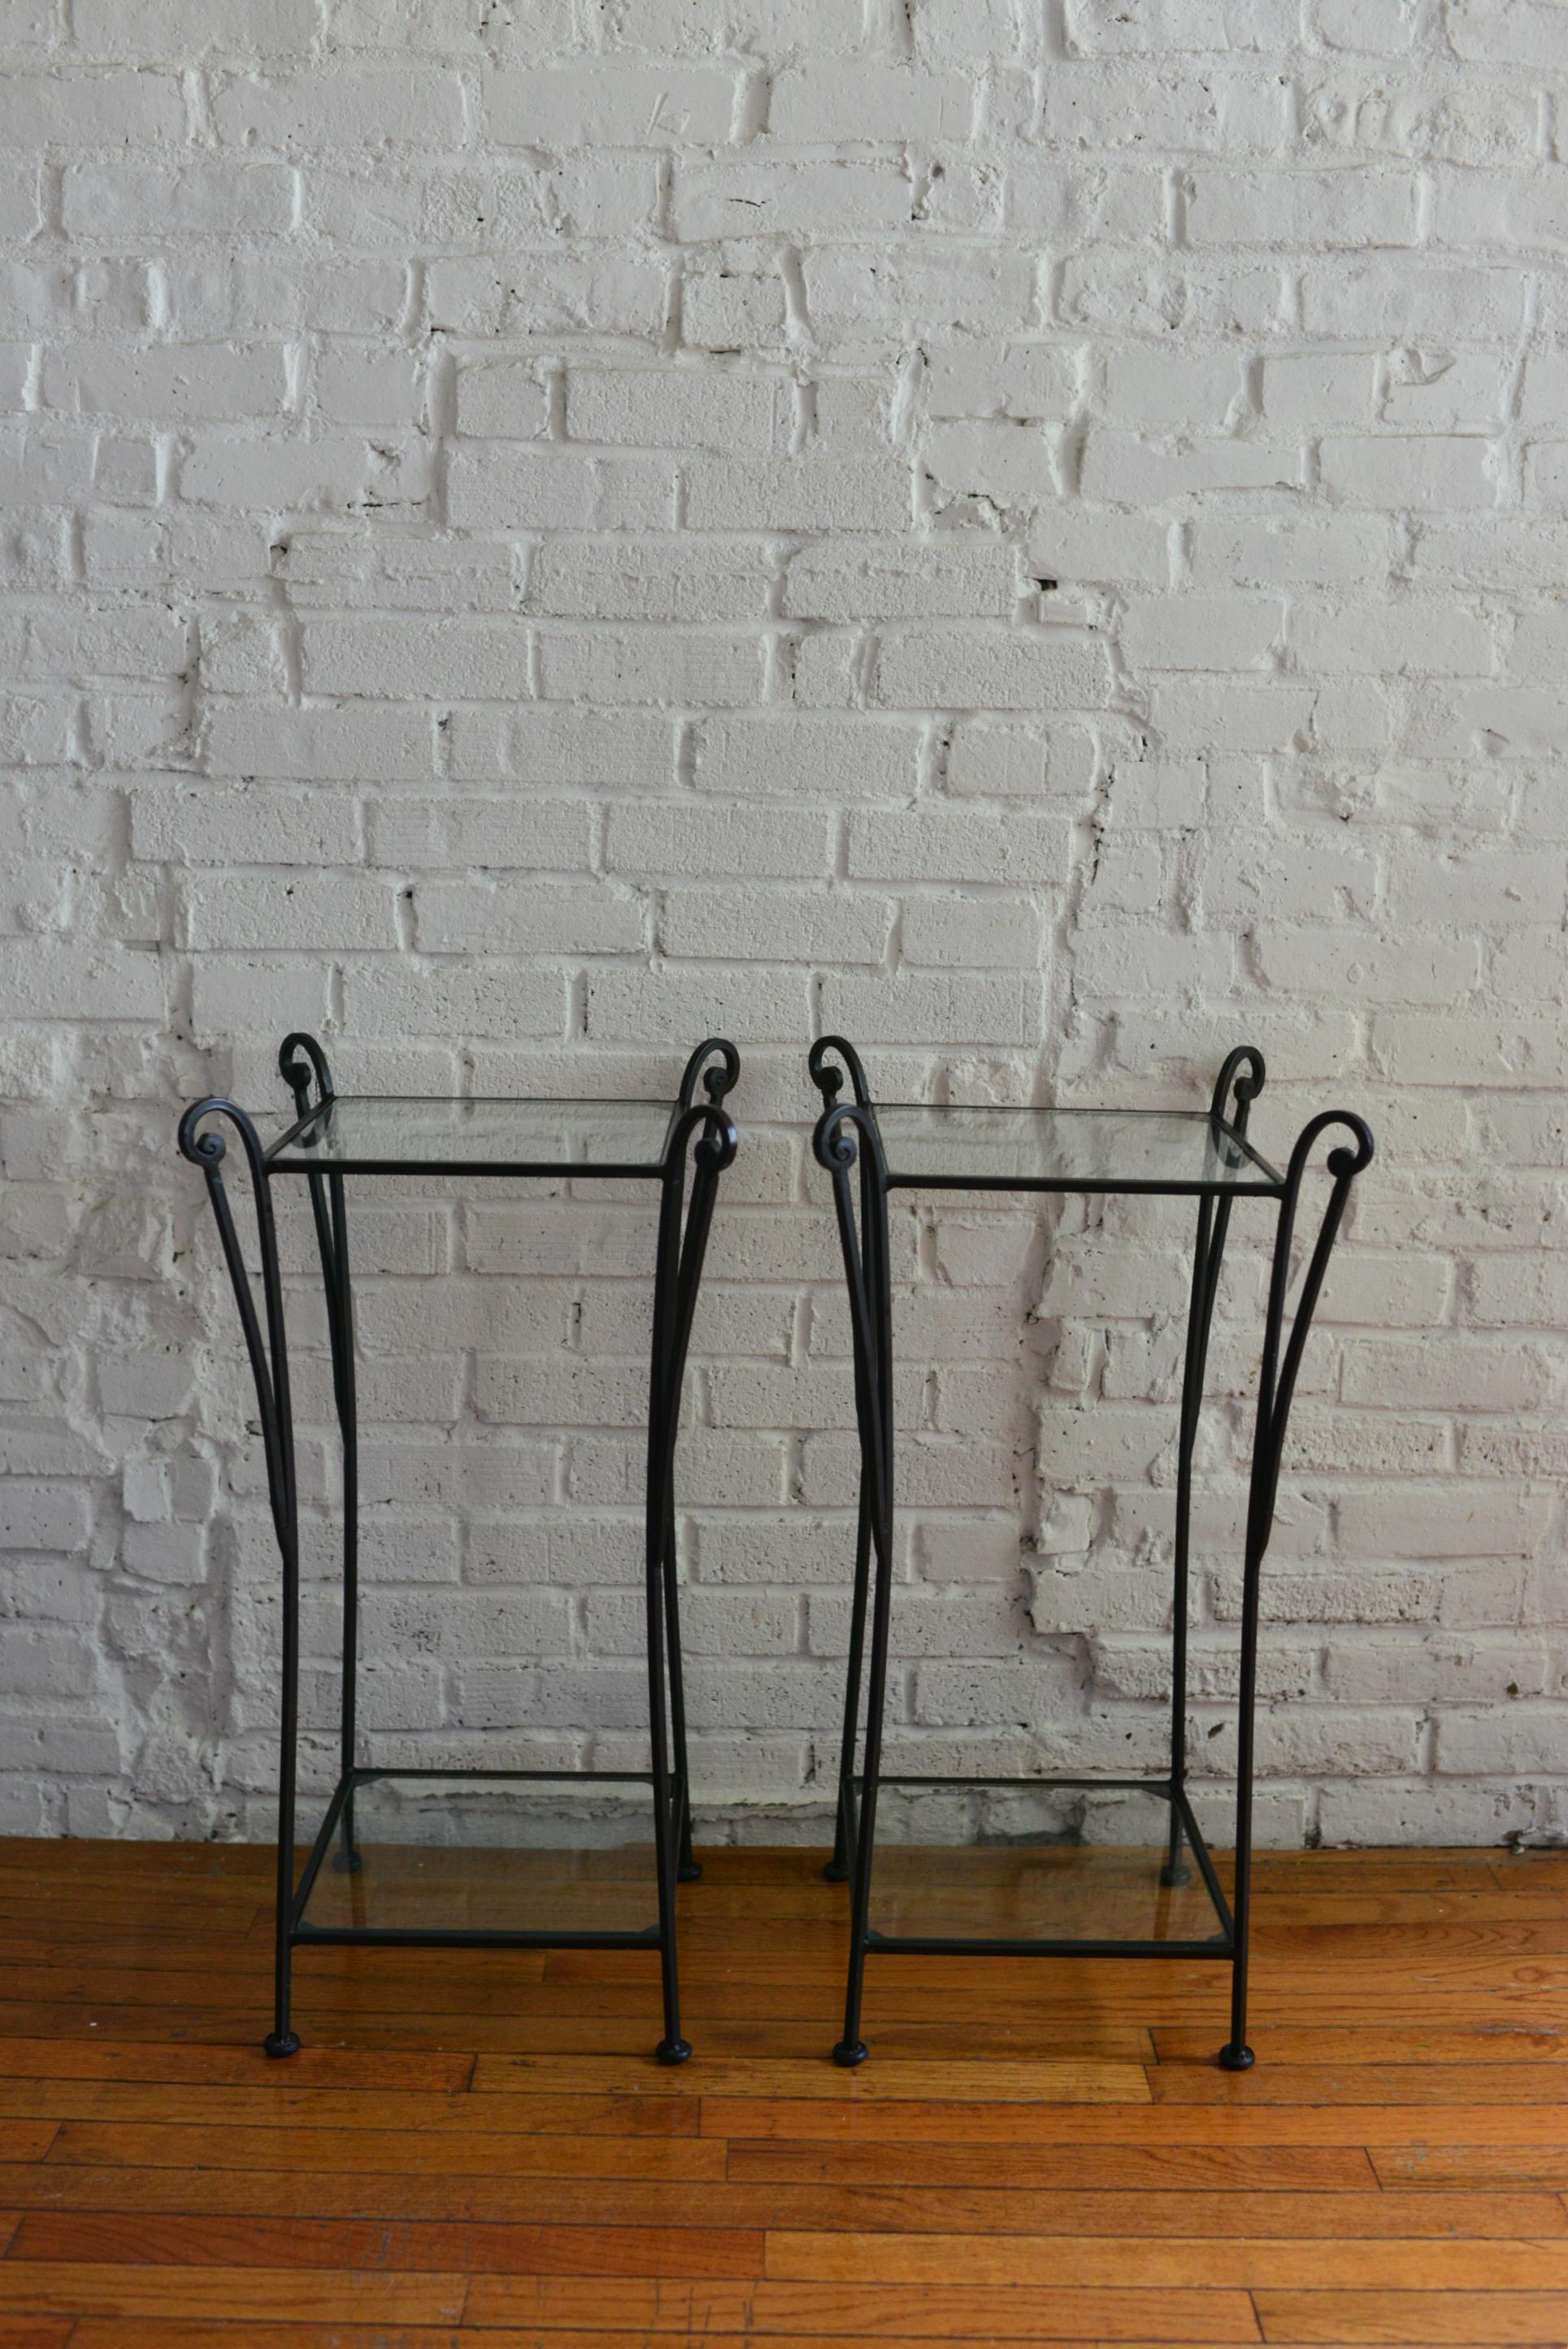 Unique and playful pair of wrought iron and glass pedestal side tables. The two-tier tables feature a wrought iron base with dramatically curved legs and curve details. Each table has an inset glass tabletop and shelf. Similar in style to many